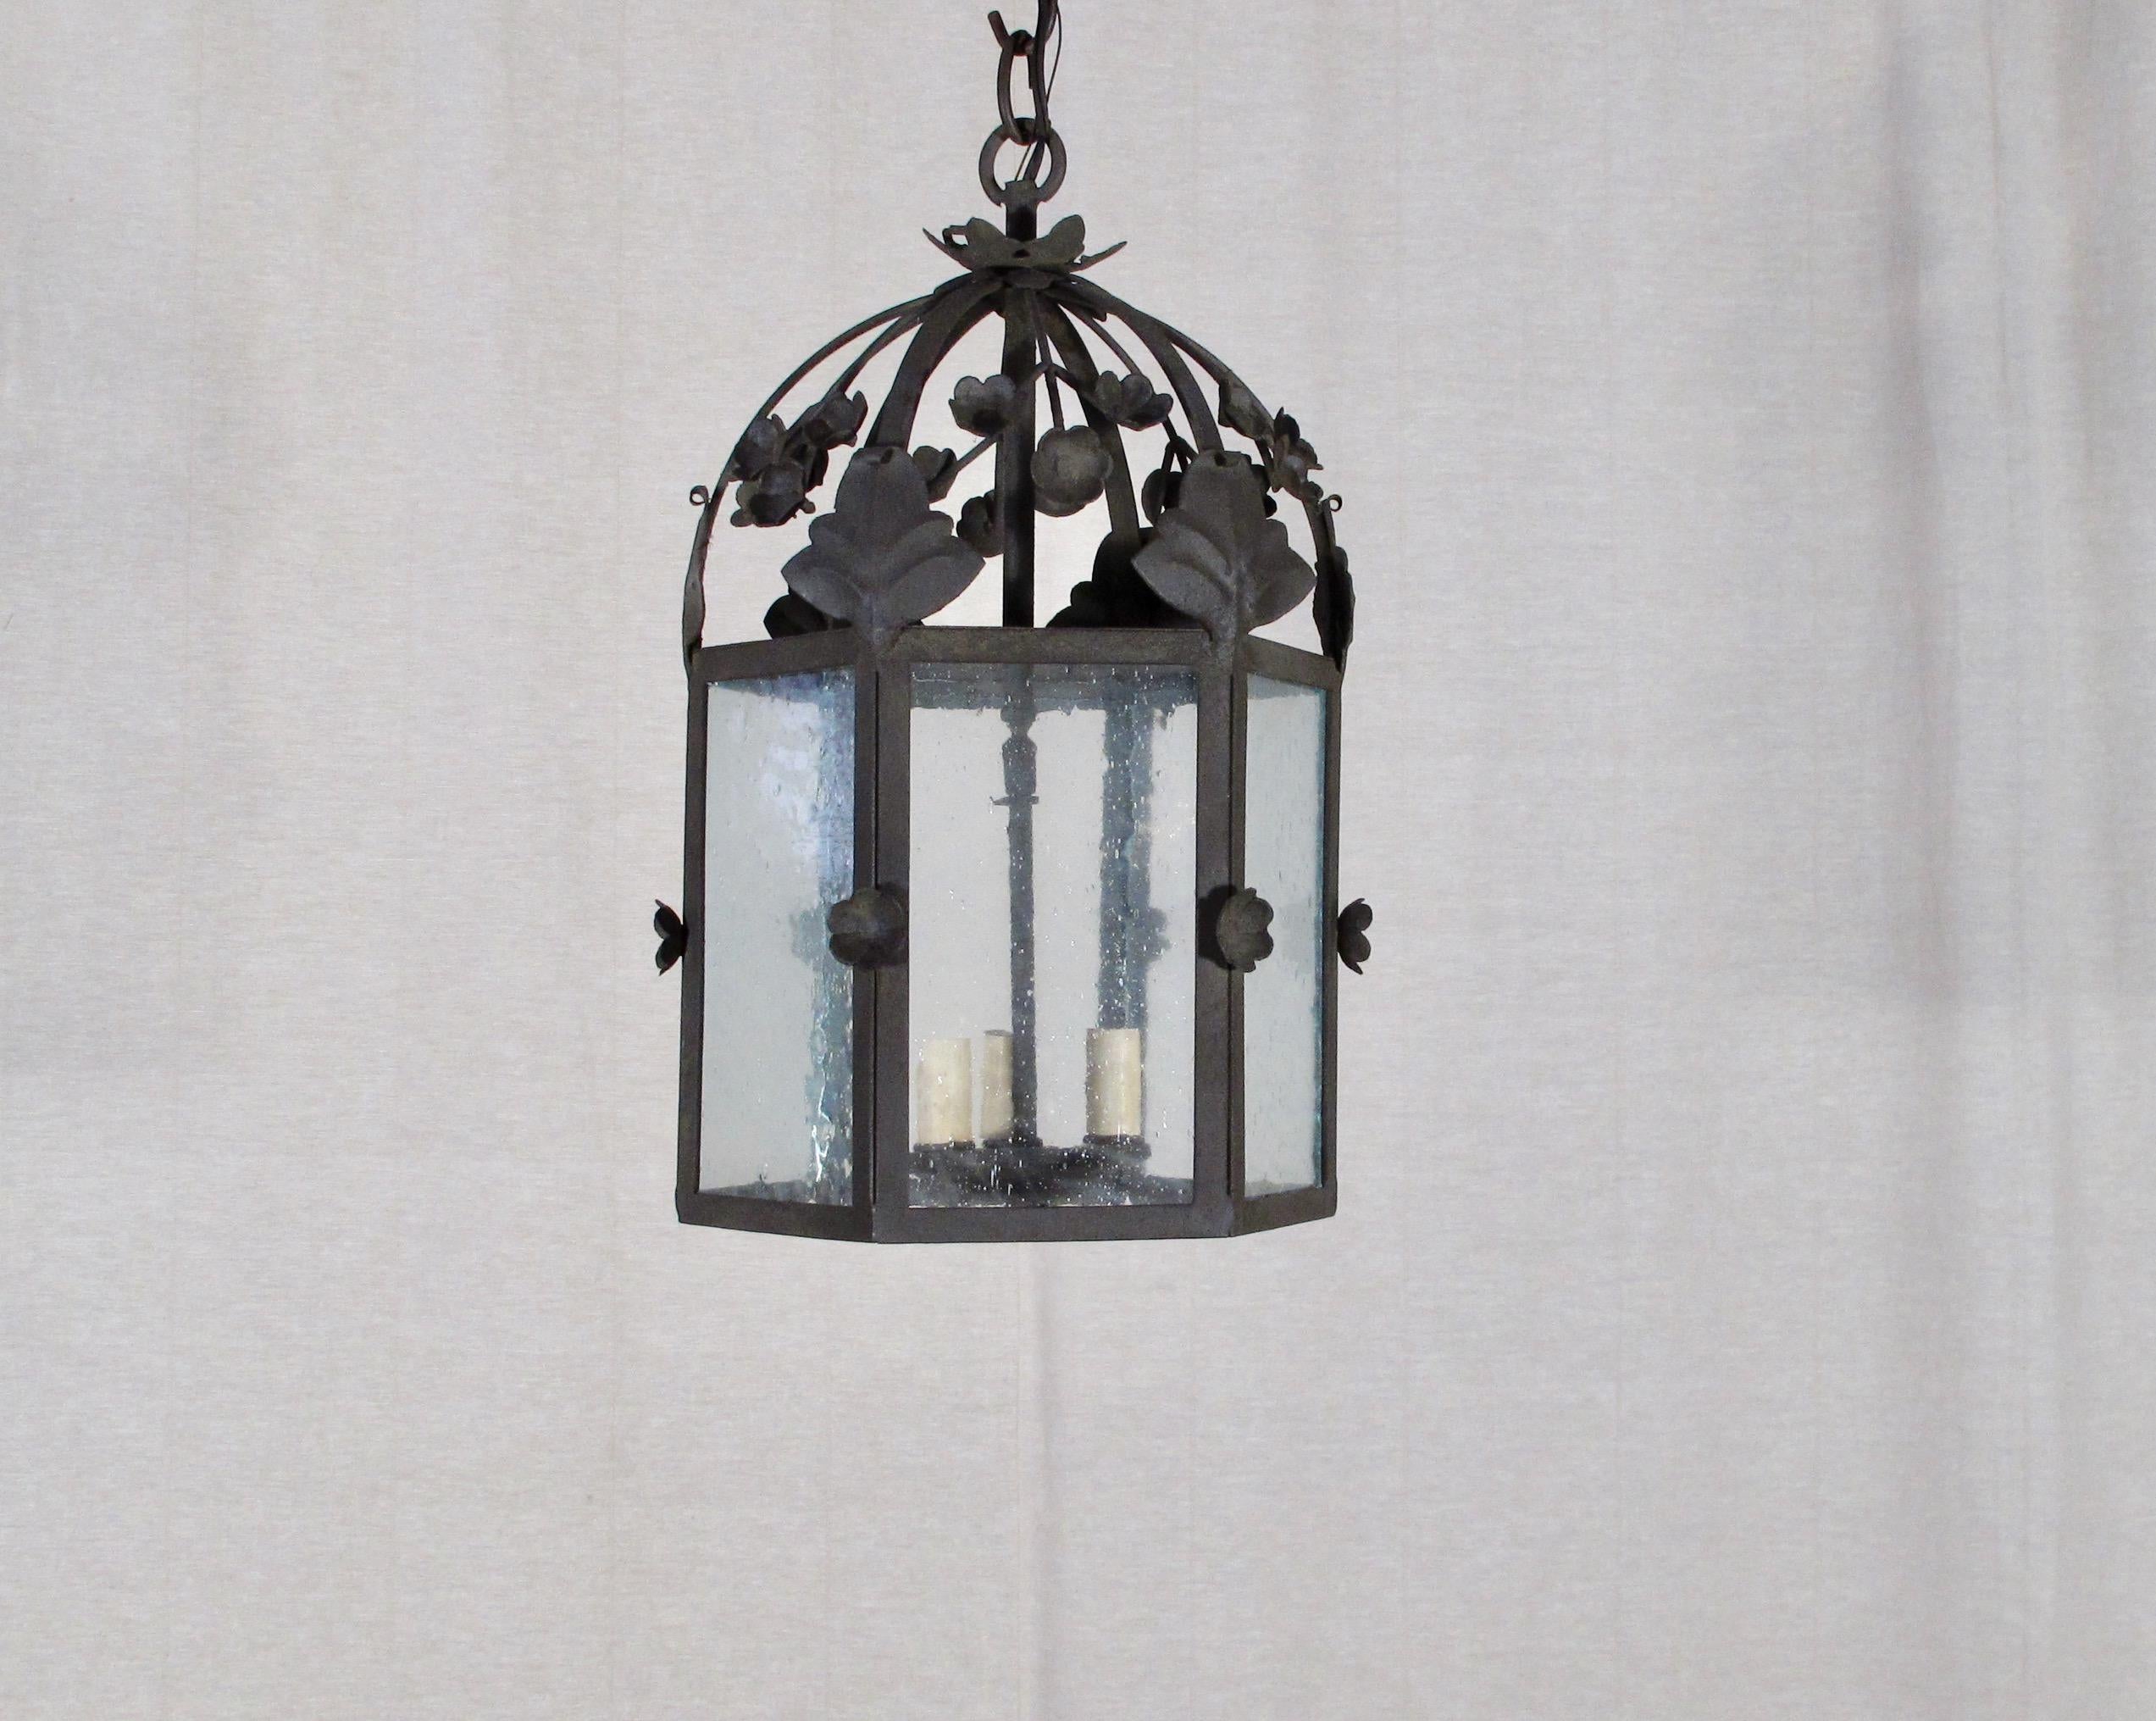 Part of the Chandelier Product Line, this is our floral lantern, Large. This fixture can be used for Interior or Exterior use and is UL Listed. 3' chain included. Three candelabra base bulbs up to 60 watts/socket. Also available in small size. This